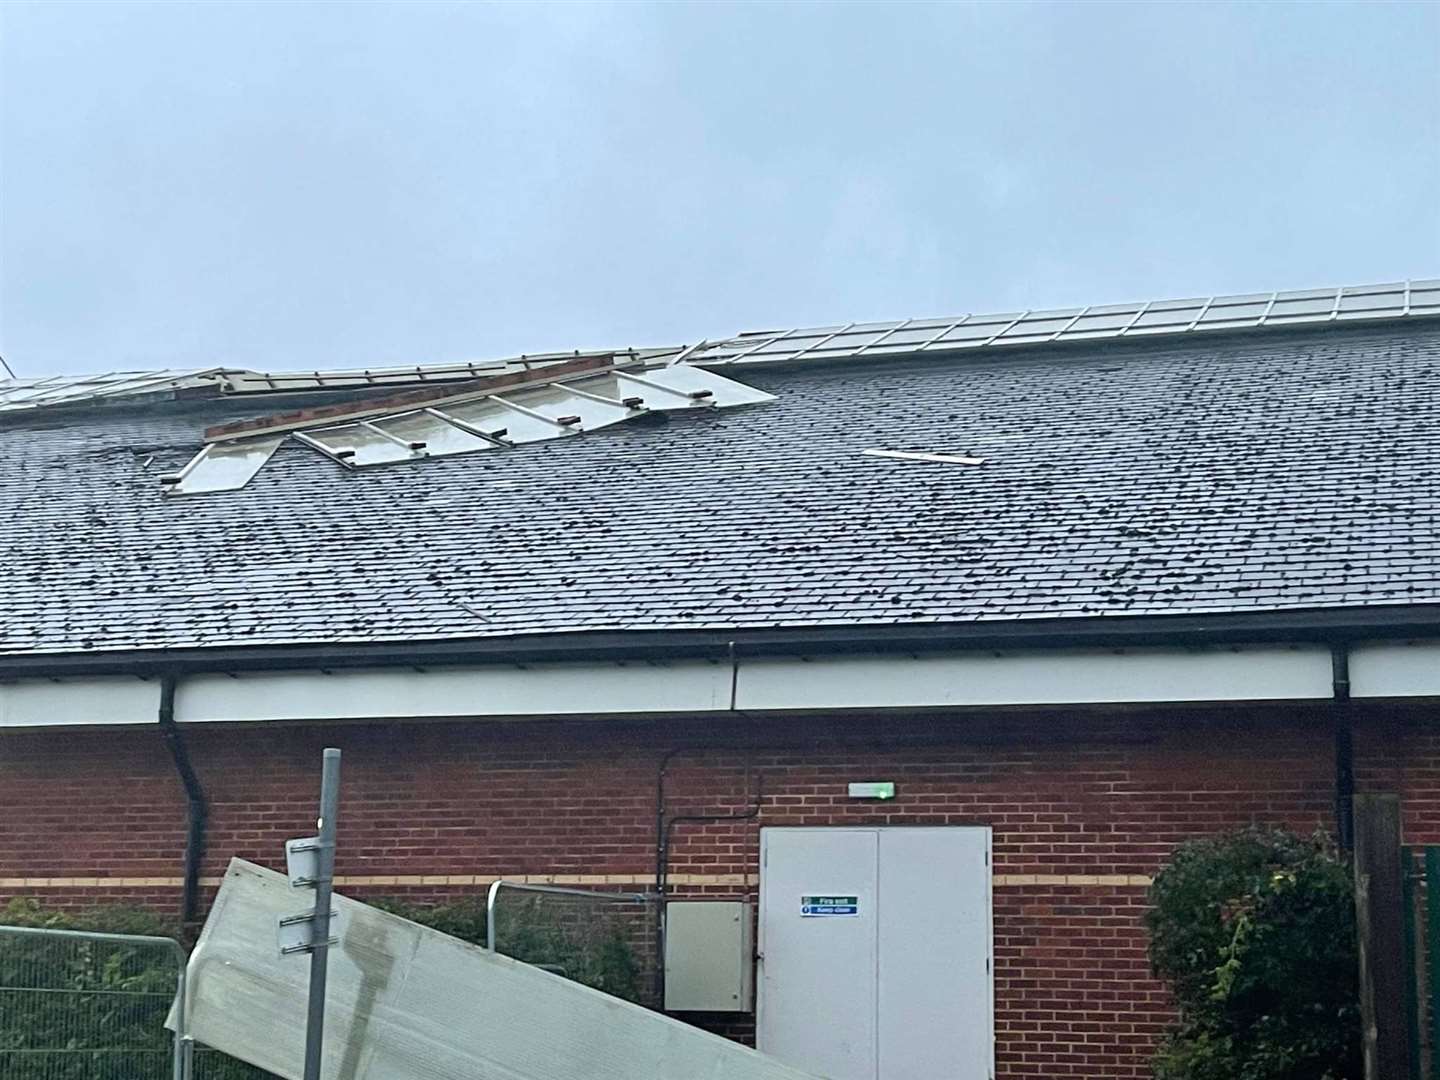 The damage to the roof of Tenterden Leisure Centre in October last year. Picture: Tenterden Leisure Centre